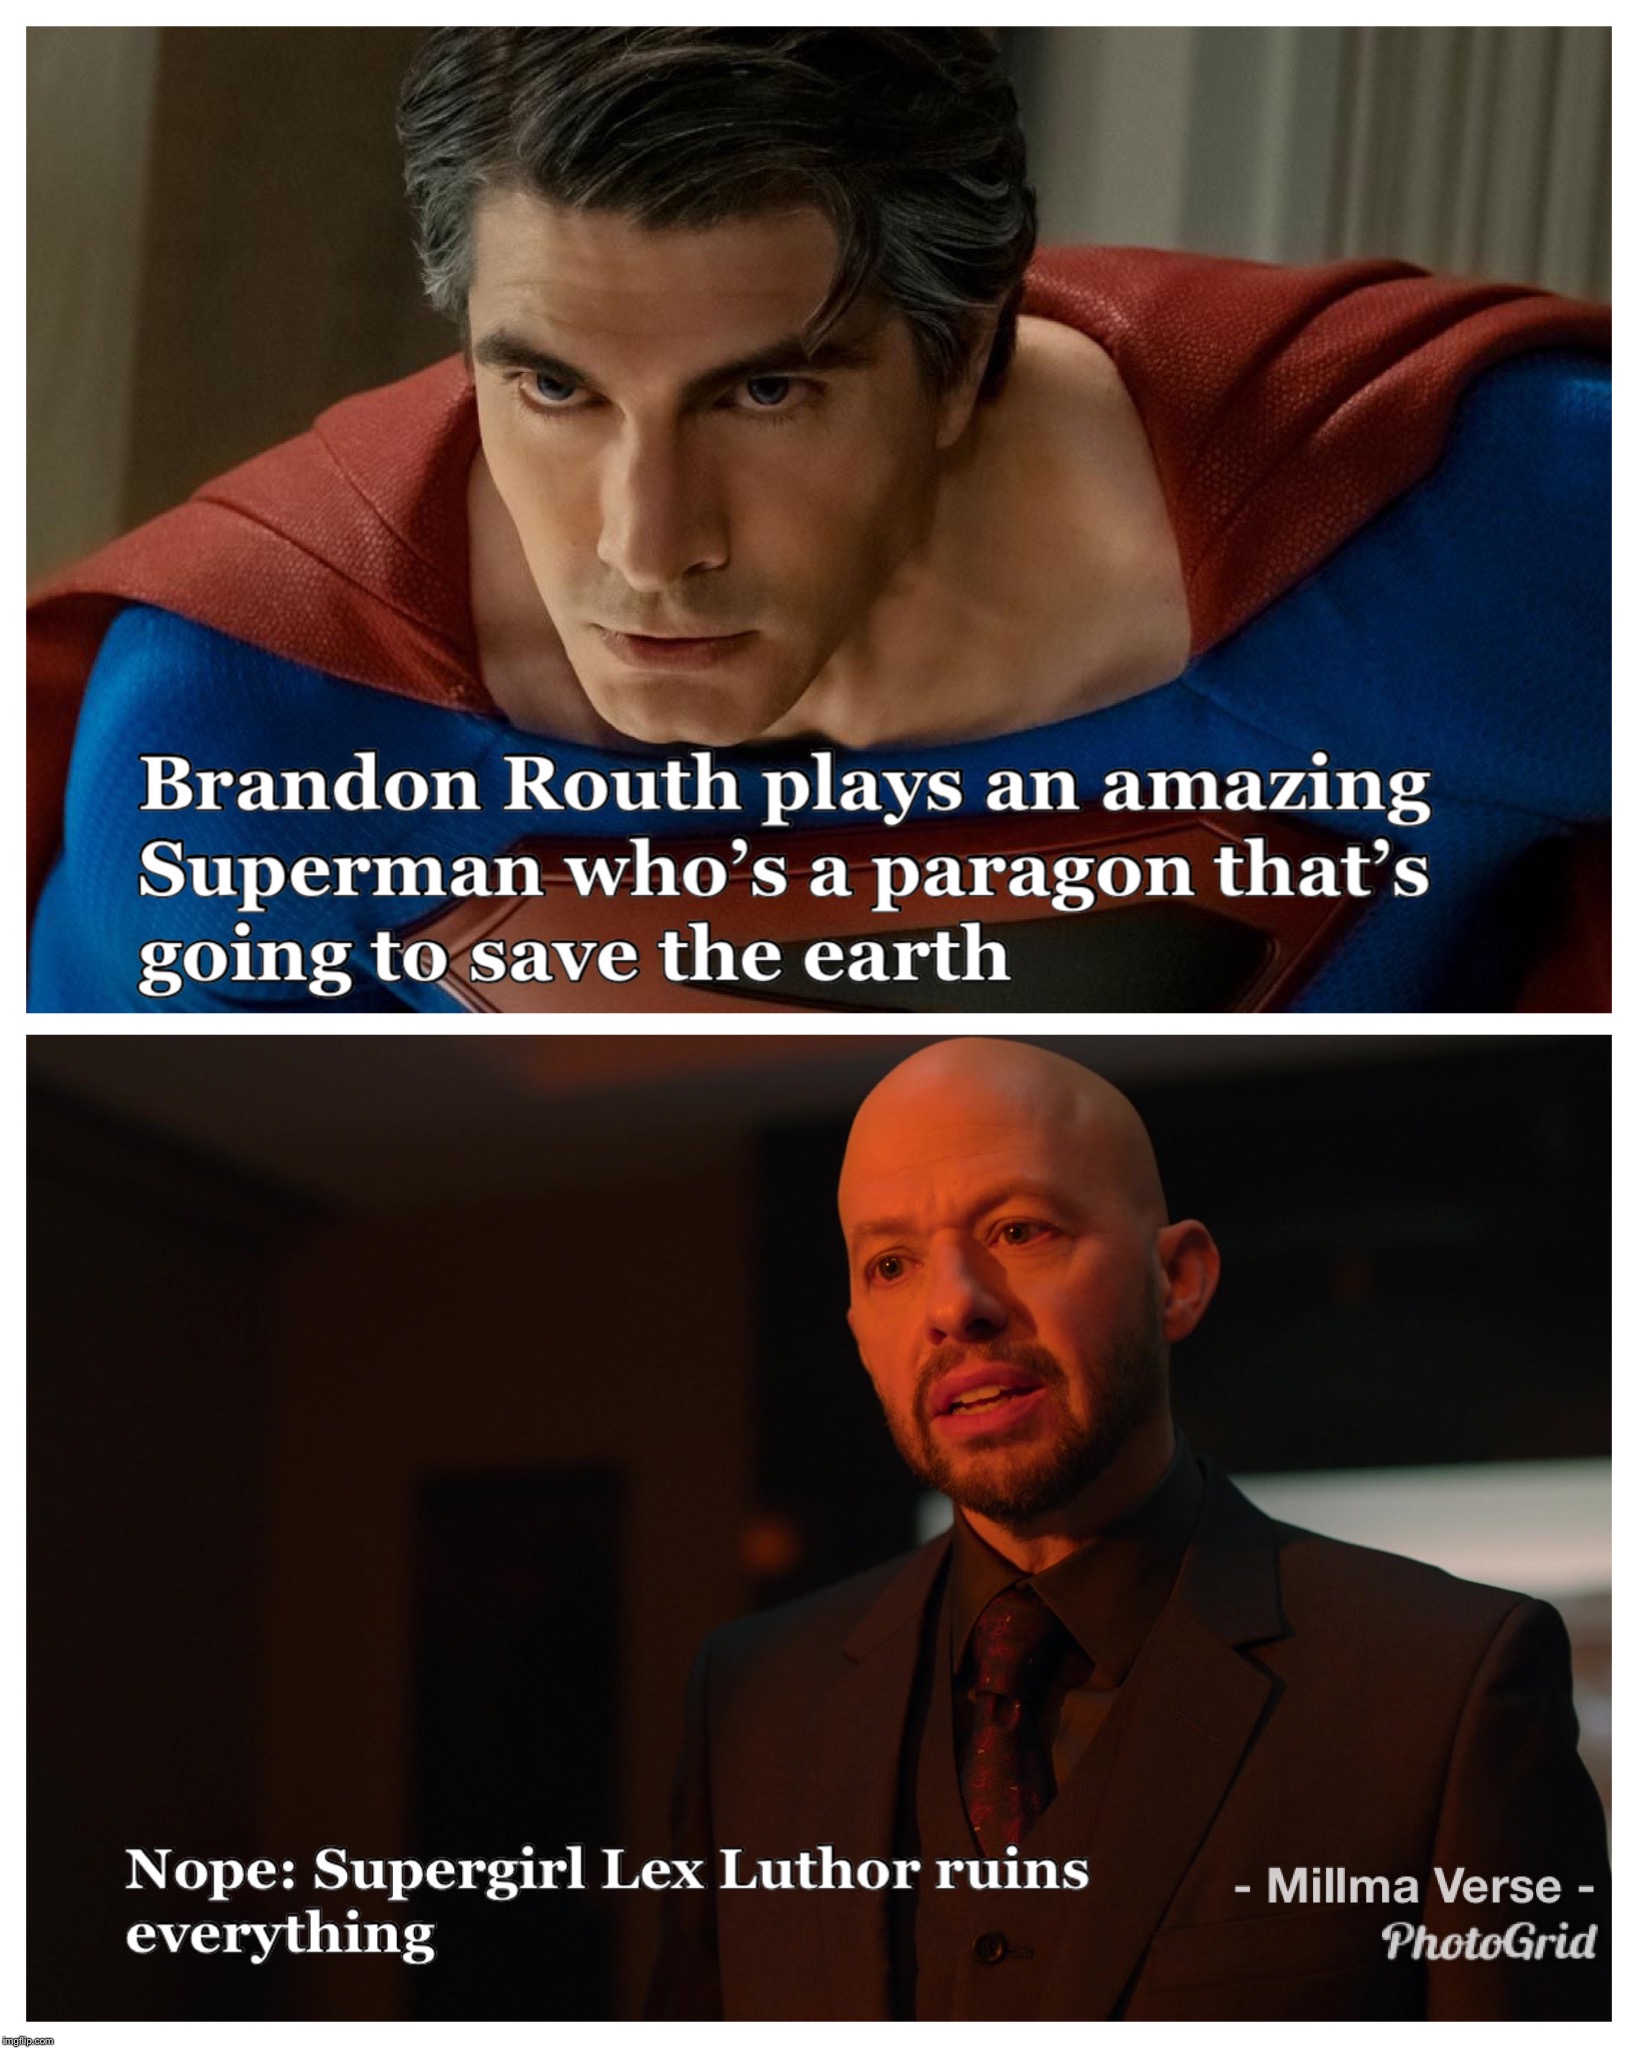 Lex Sucks | image tagged in supergirl,superman,lex luthor,crisis on infinite earths,arrowverse | made w/ Imgflip meme maker